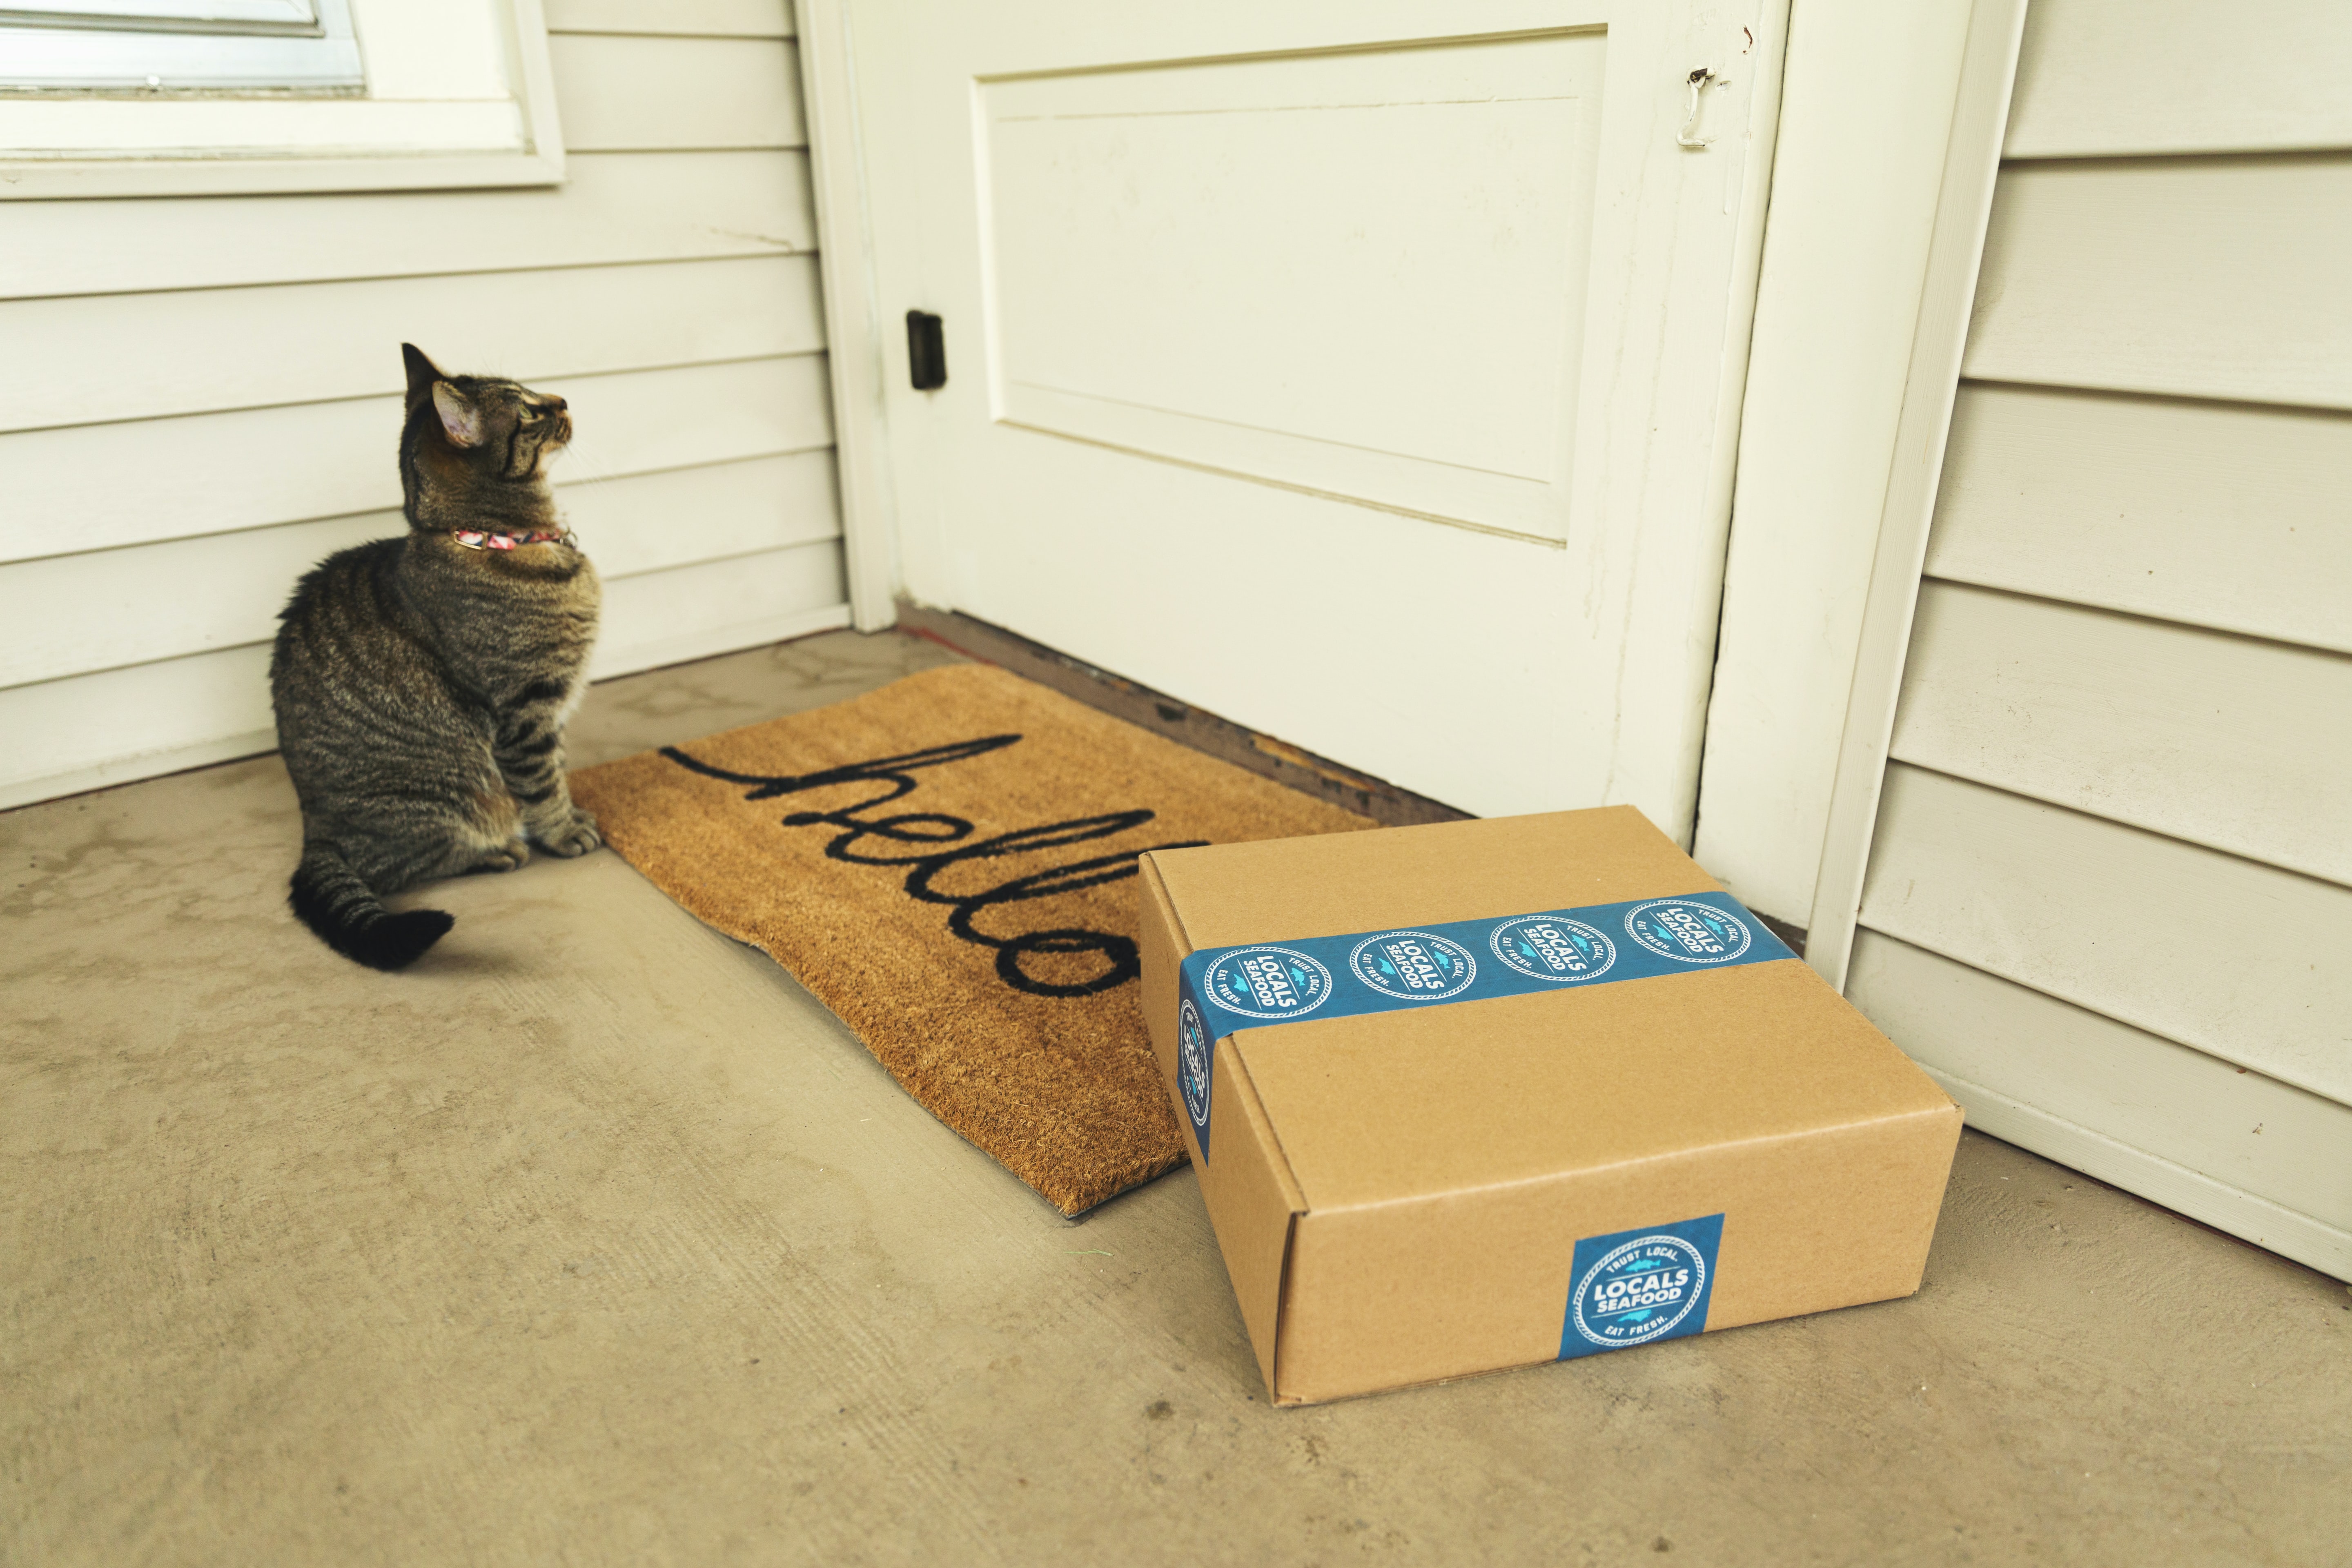 Kitty and package on a doorstep porch of a house.